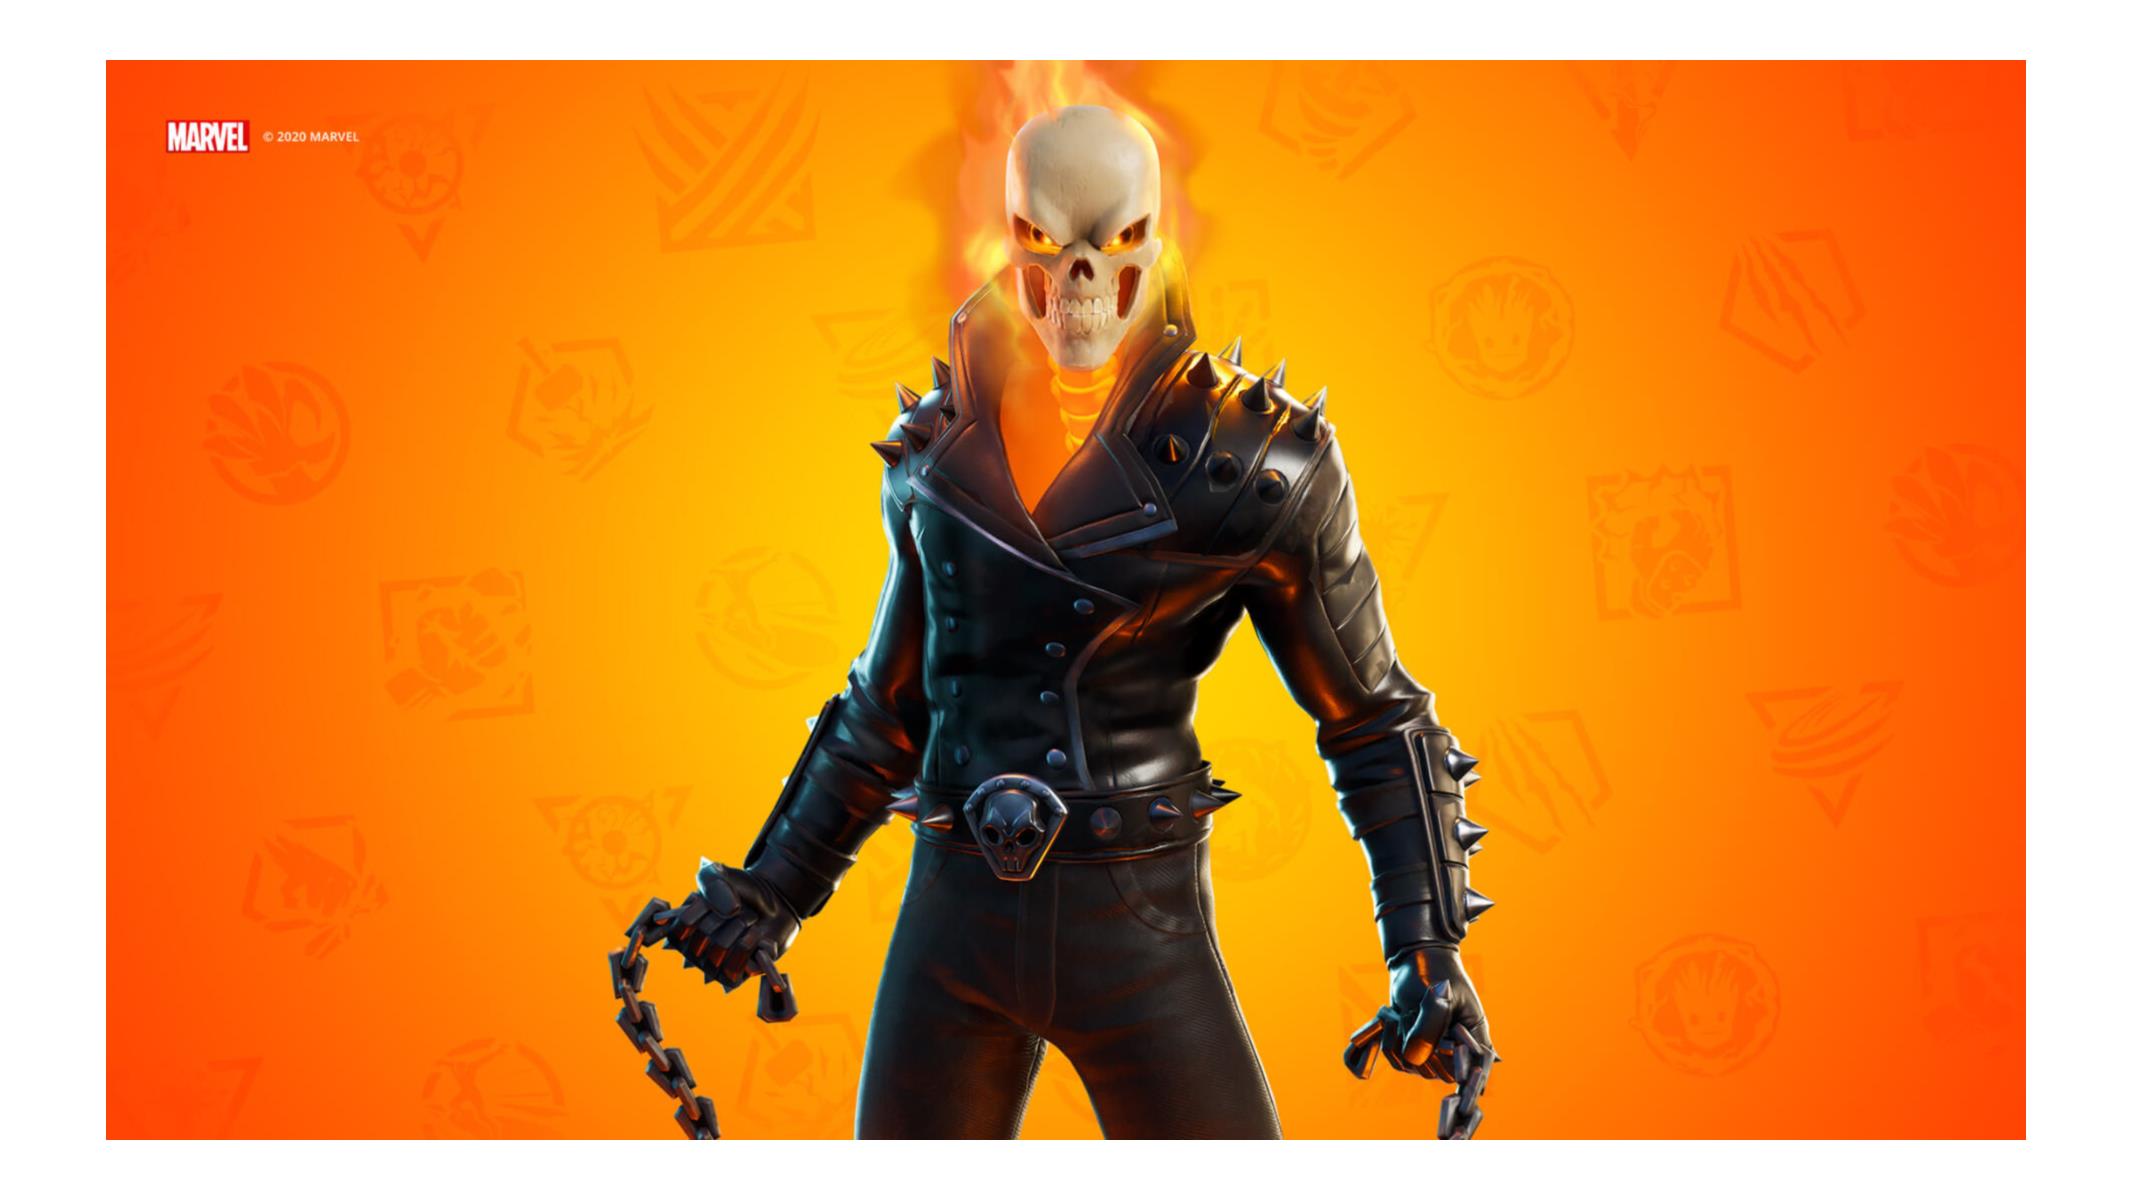 Flaming Hot Ghost Rider Skins Are The Latest Marvel Tie In For Fortnite Hothardware